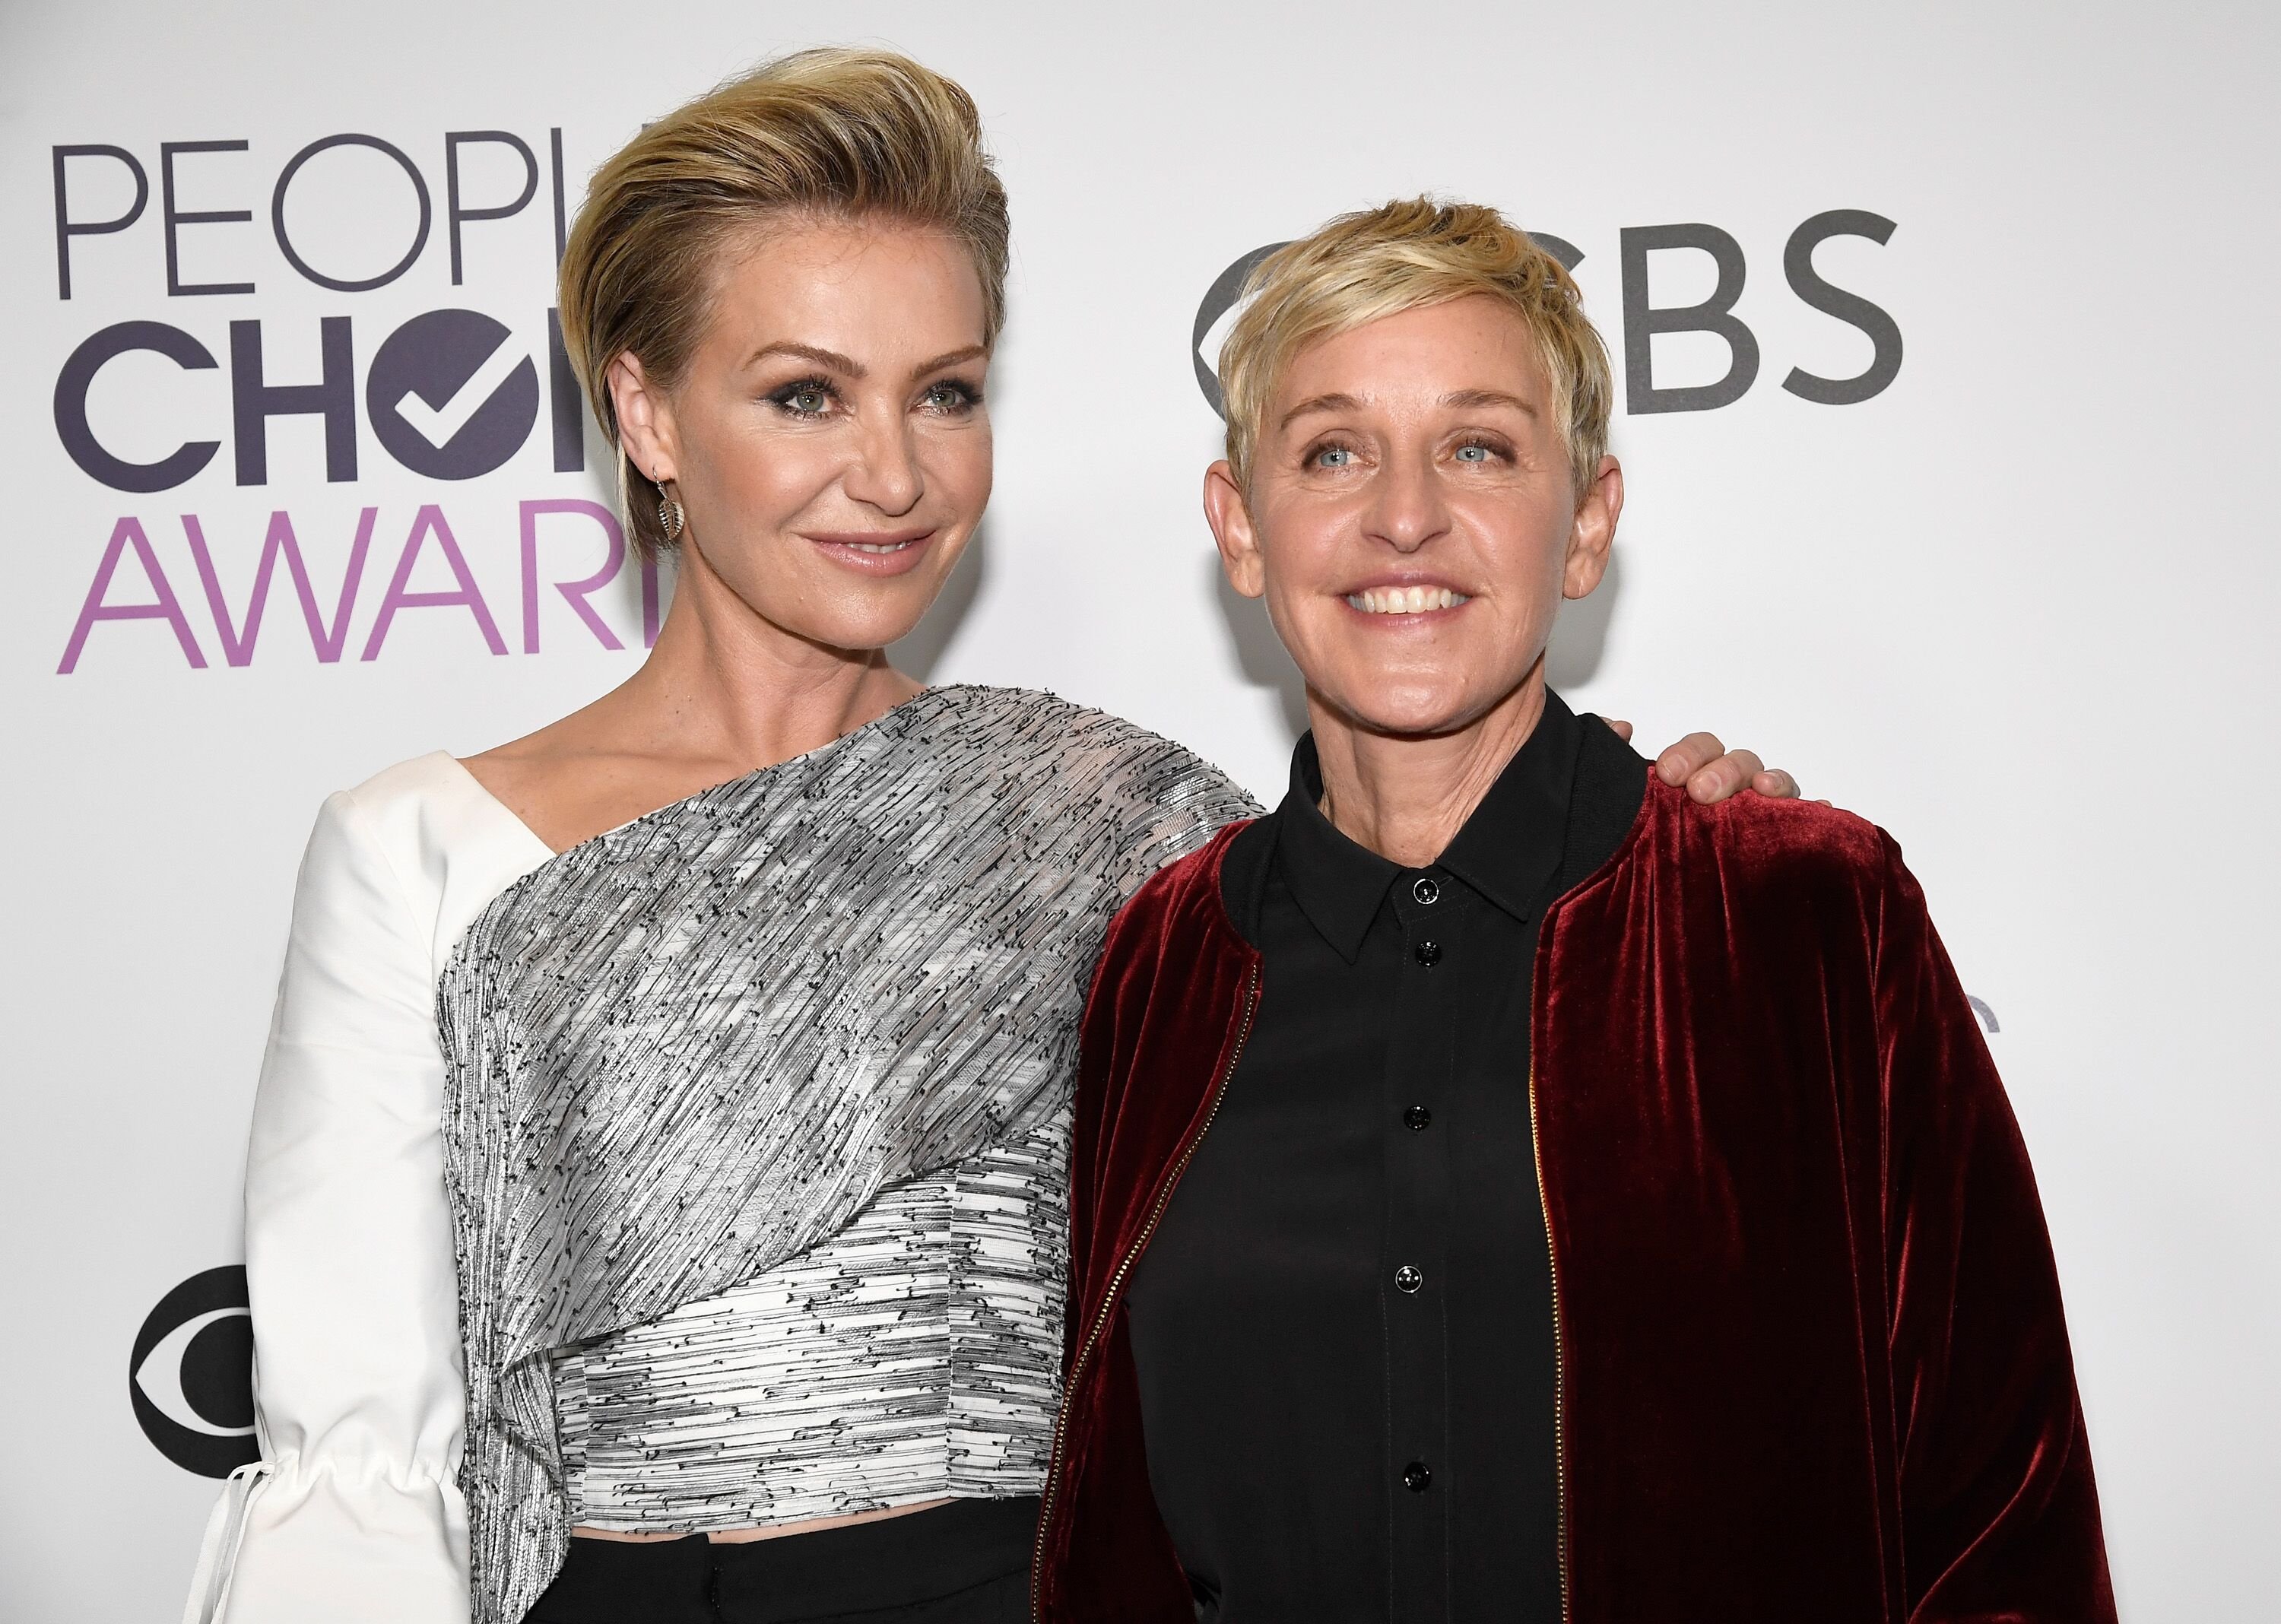 Ellen DeGeneres and wife Portia de Rossi at the People's Choice Awards| Source: Getty Images